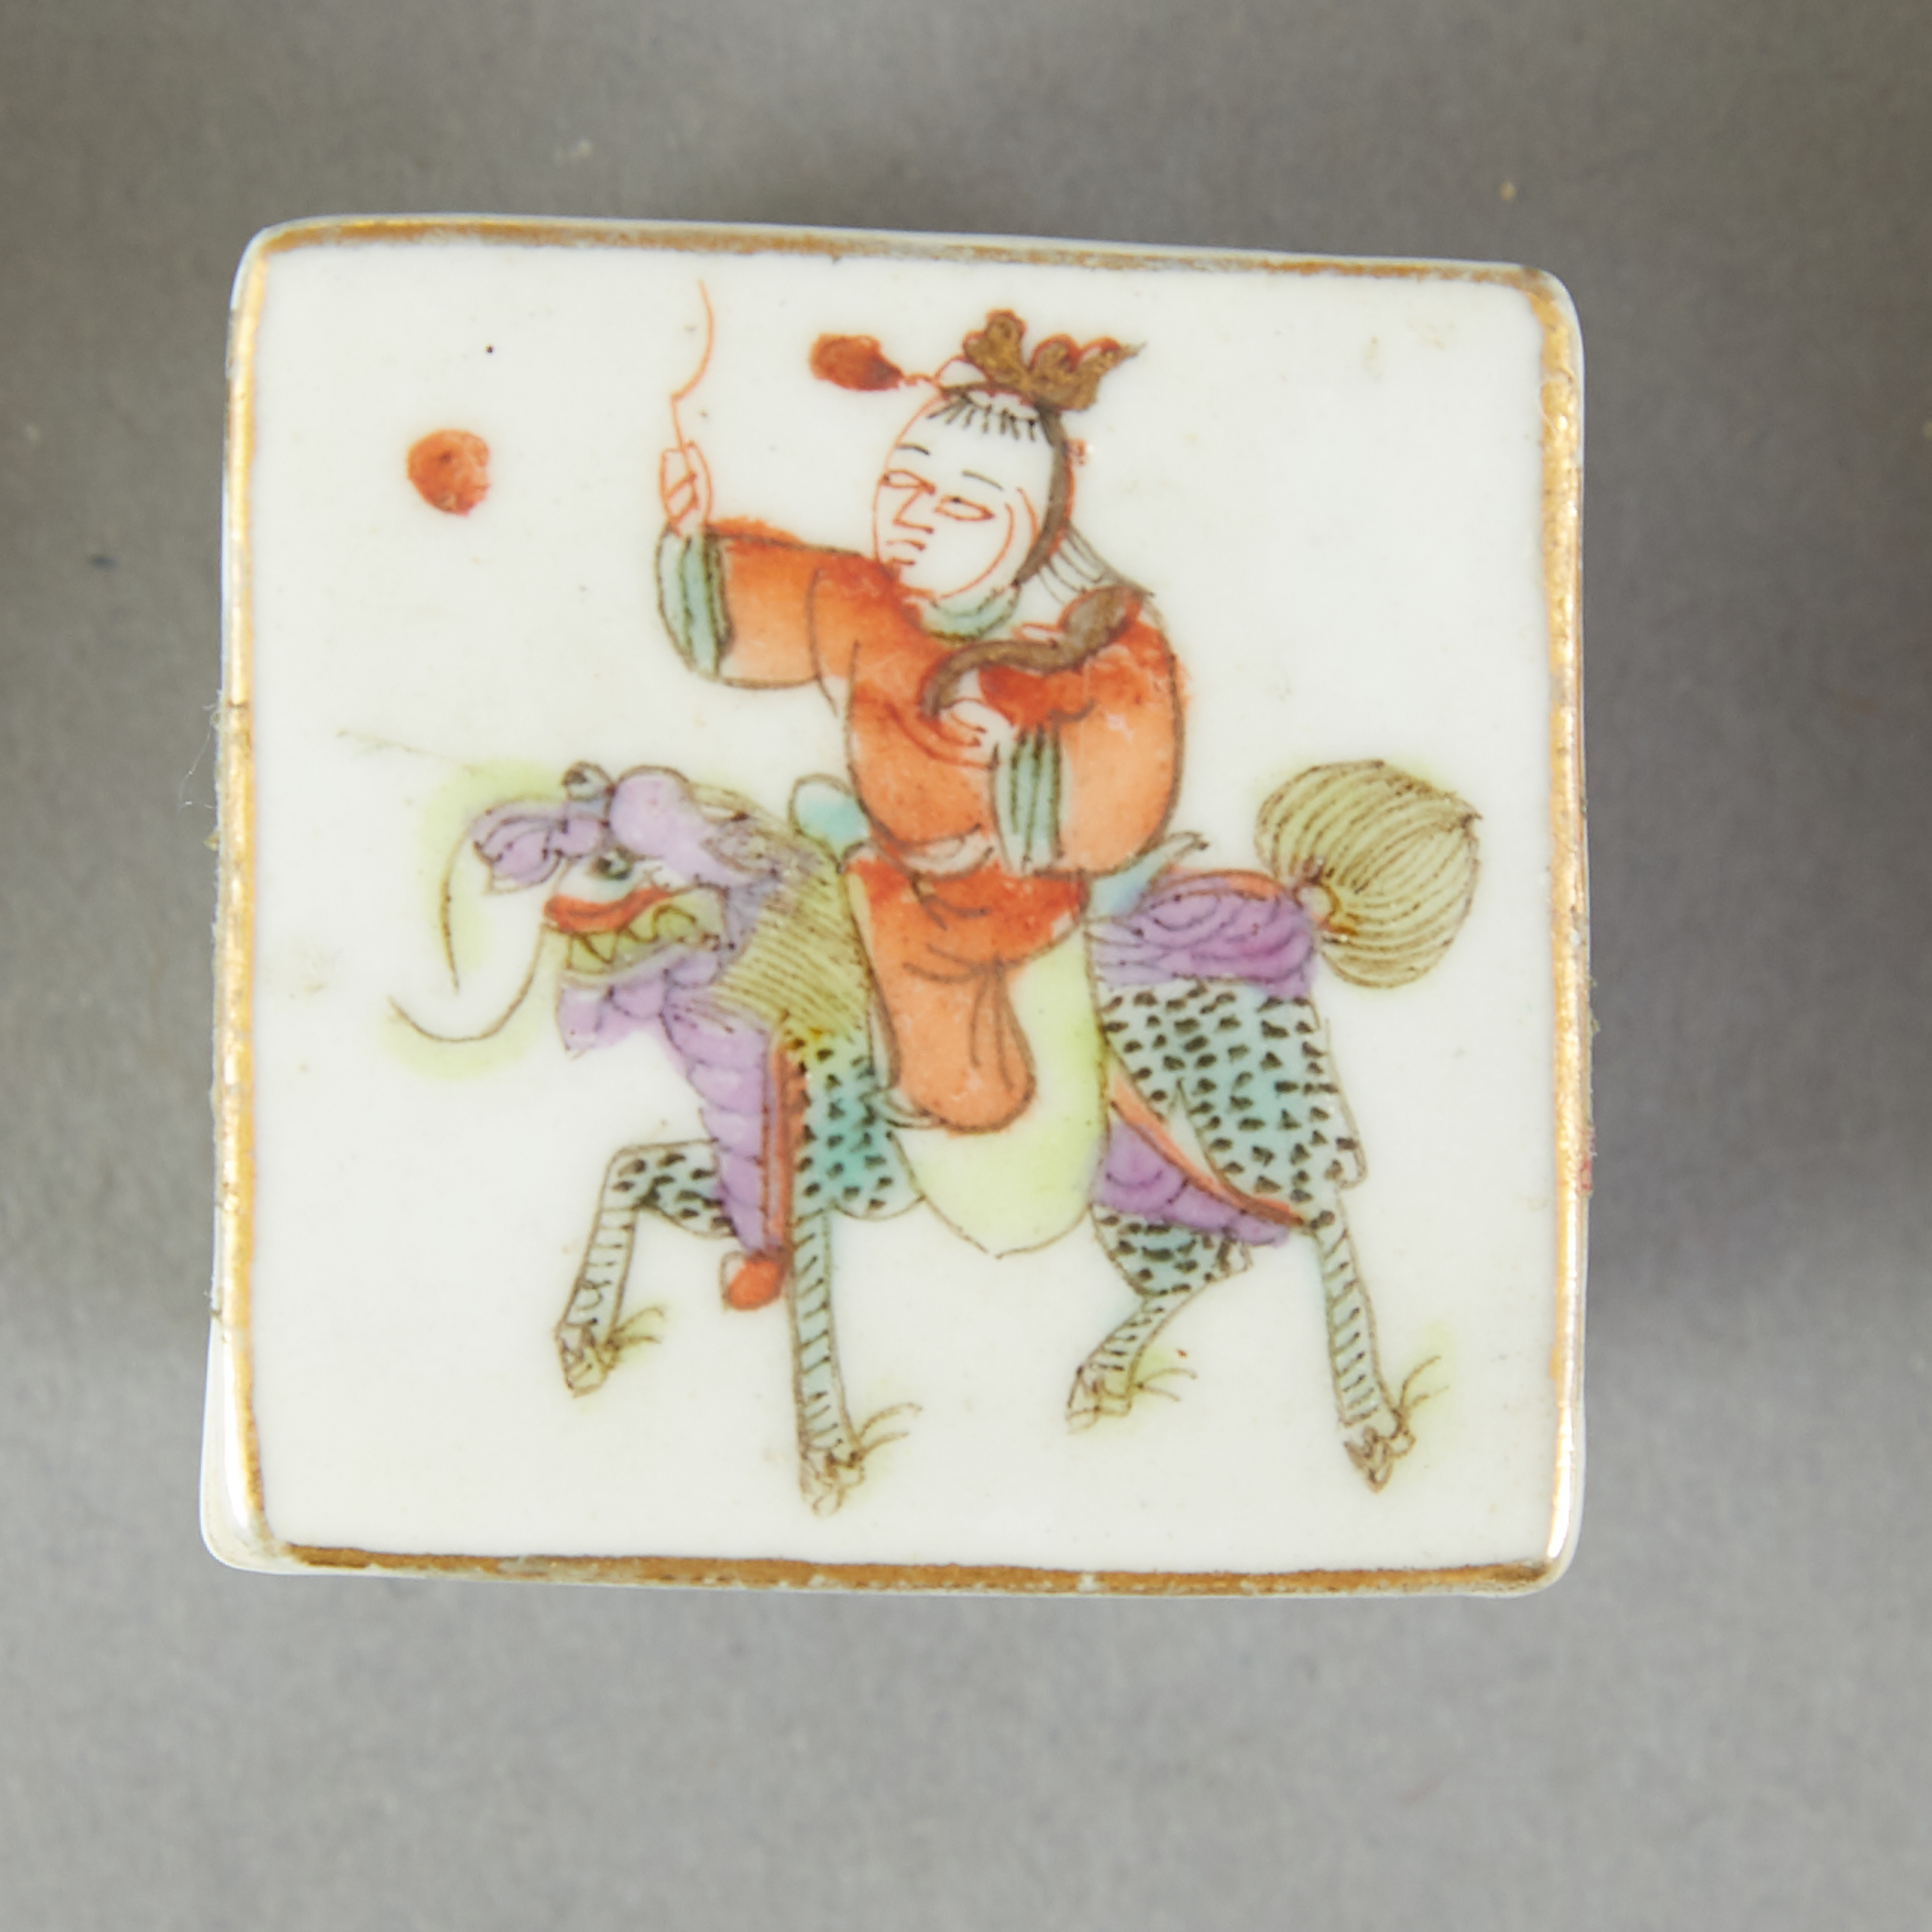 Grp 4: 19th c. Chinese Famille Rose Porcelain Plates Pill Box - Image 5 of 7